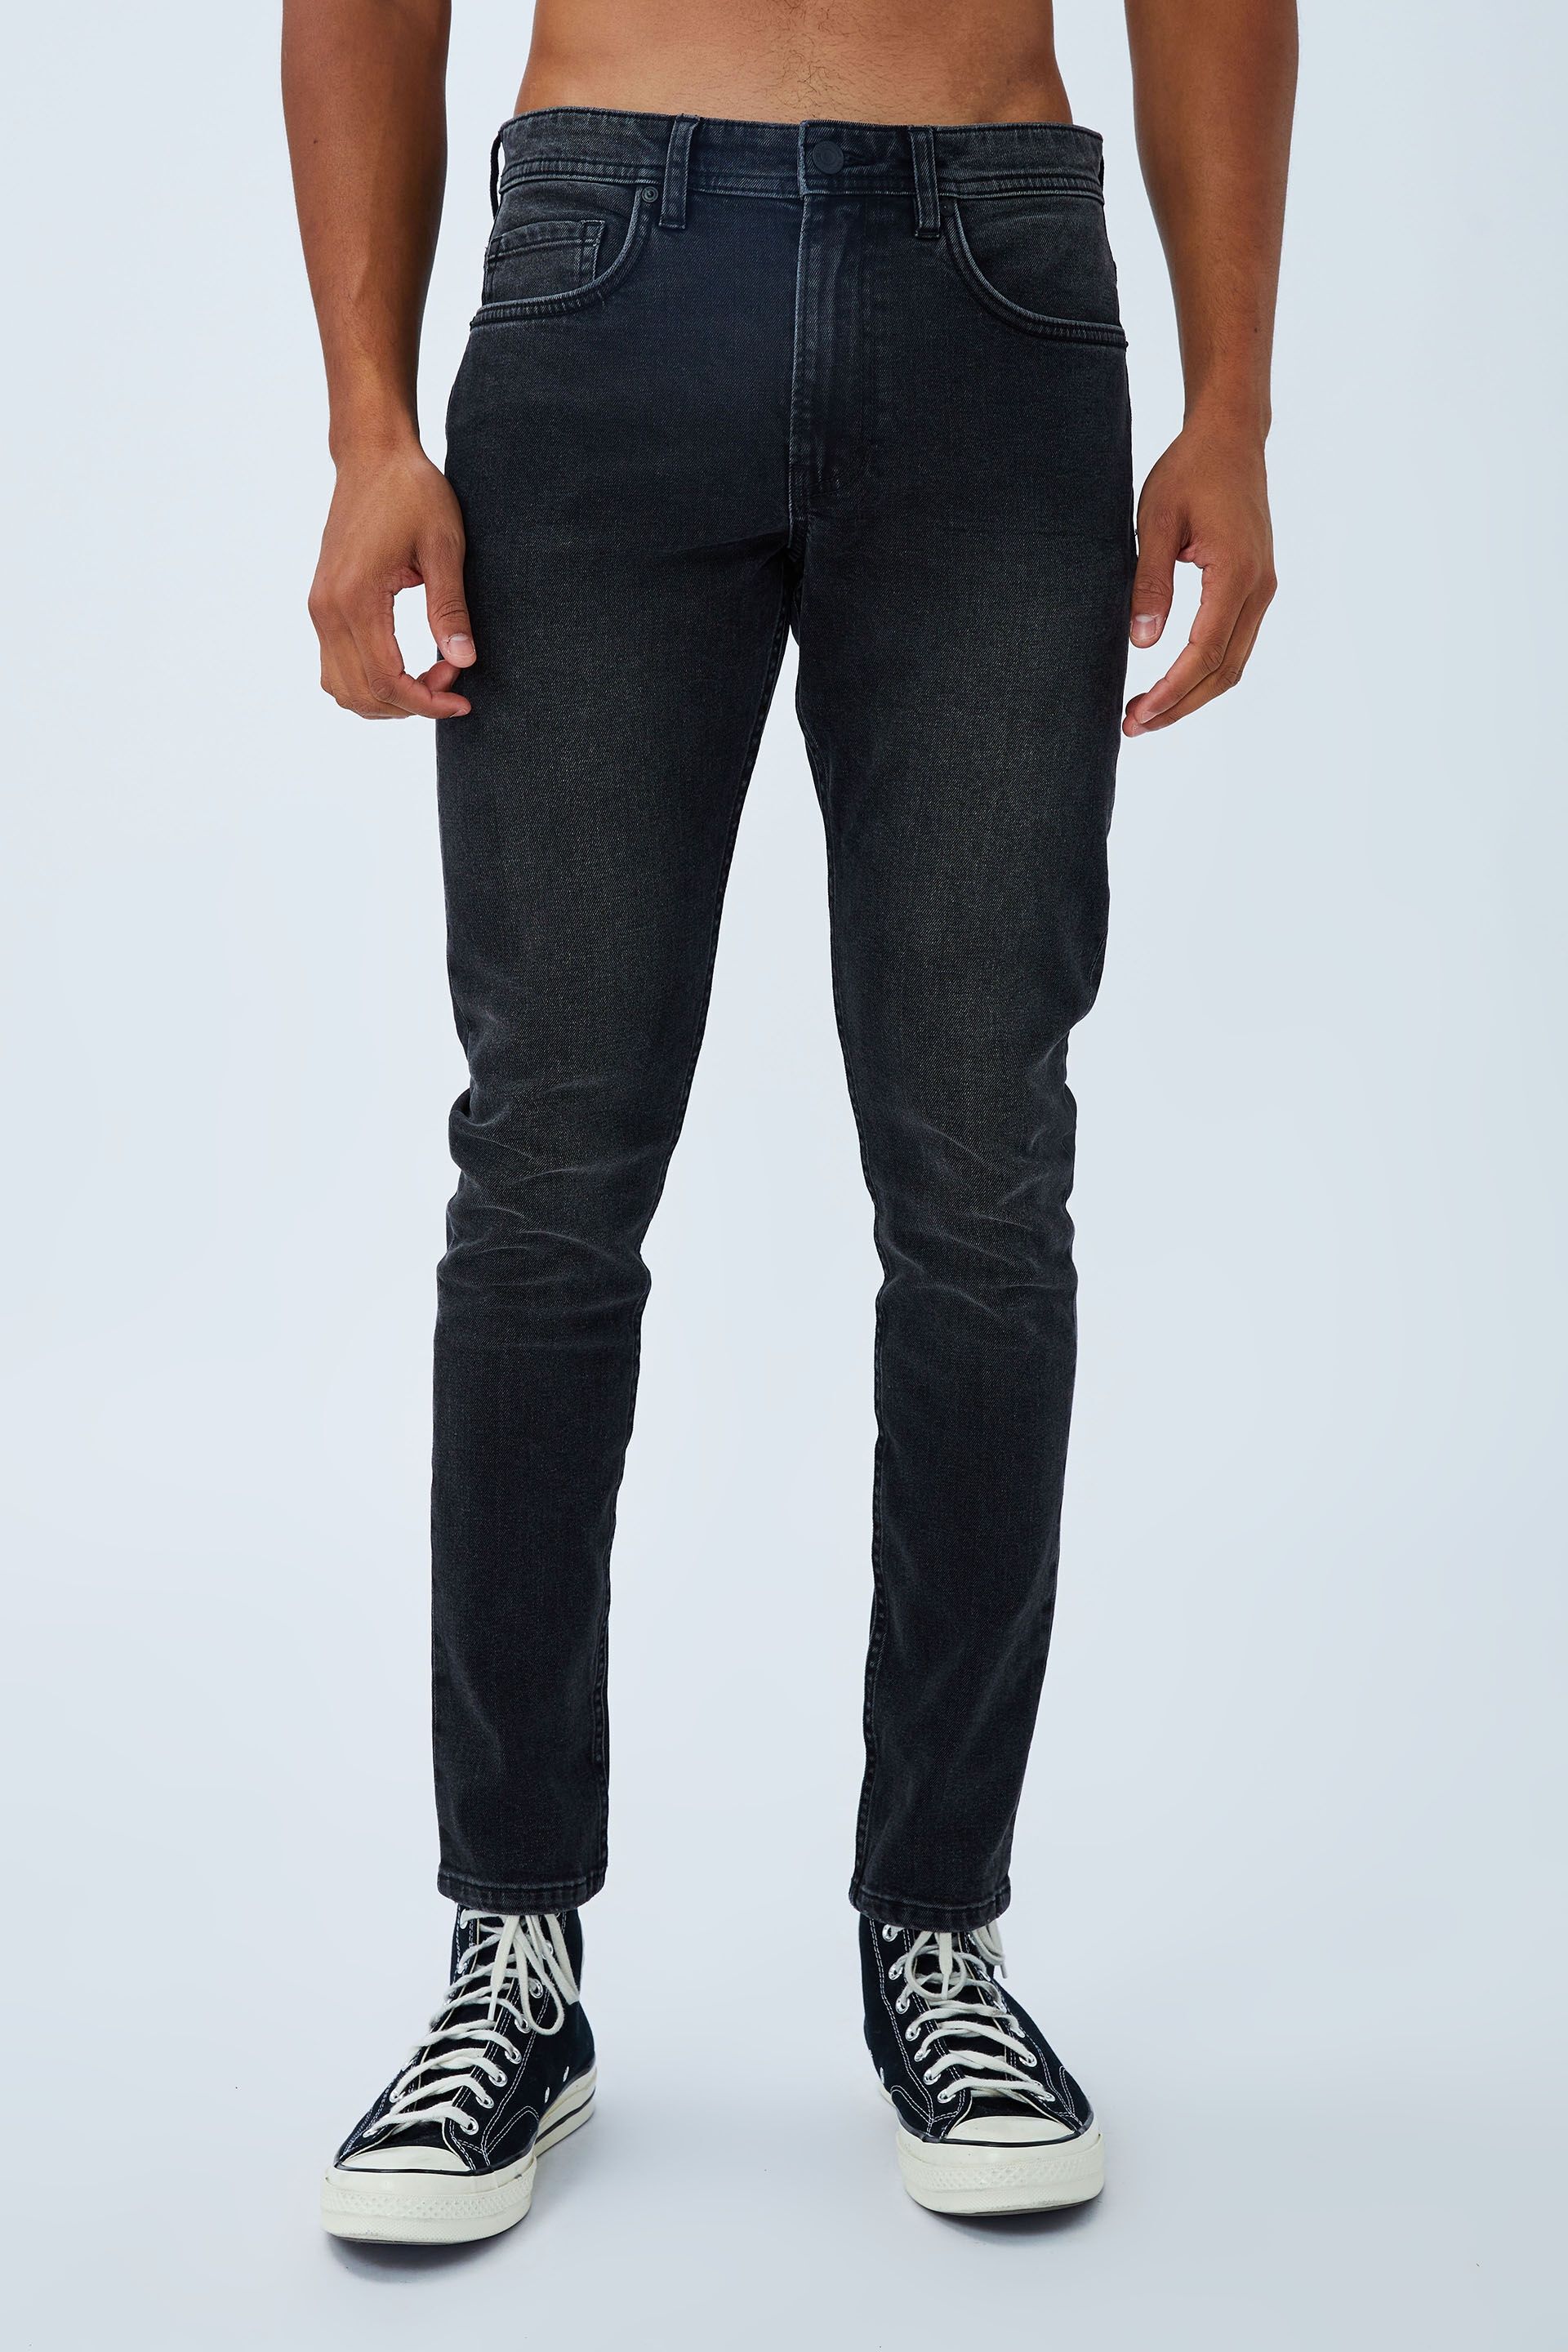 cotton on ripped jeans mens